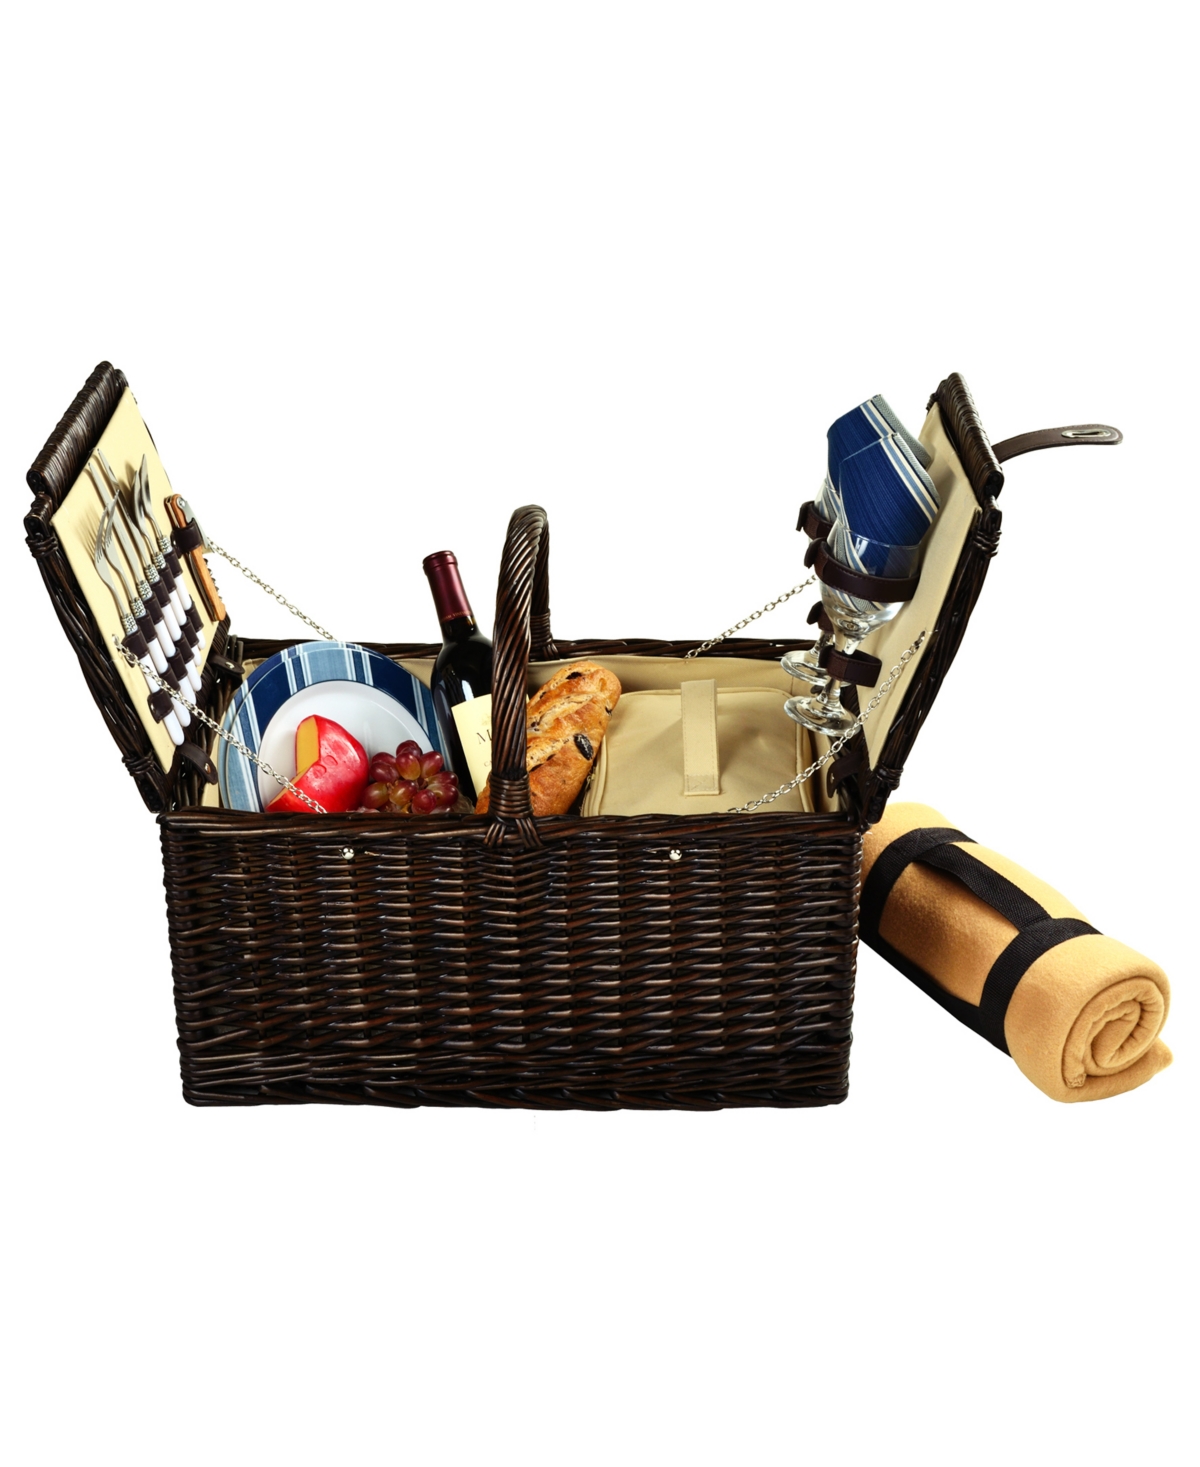 Surrey Willow Picnic Basket with Blanket - Service for 2 - Orange